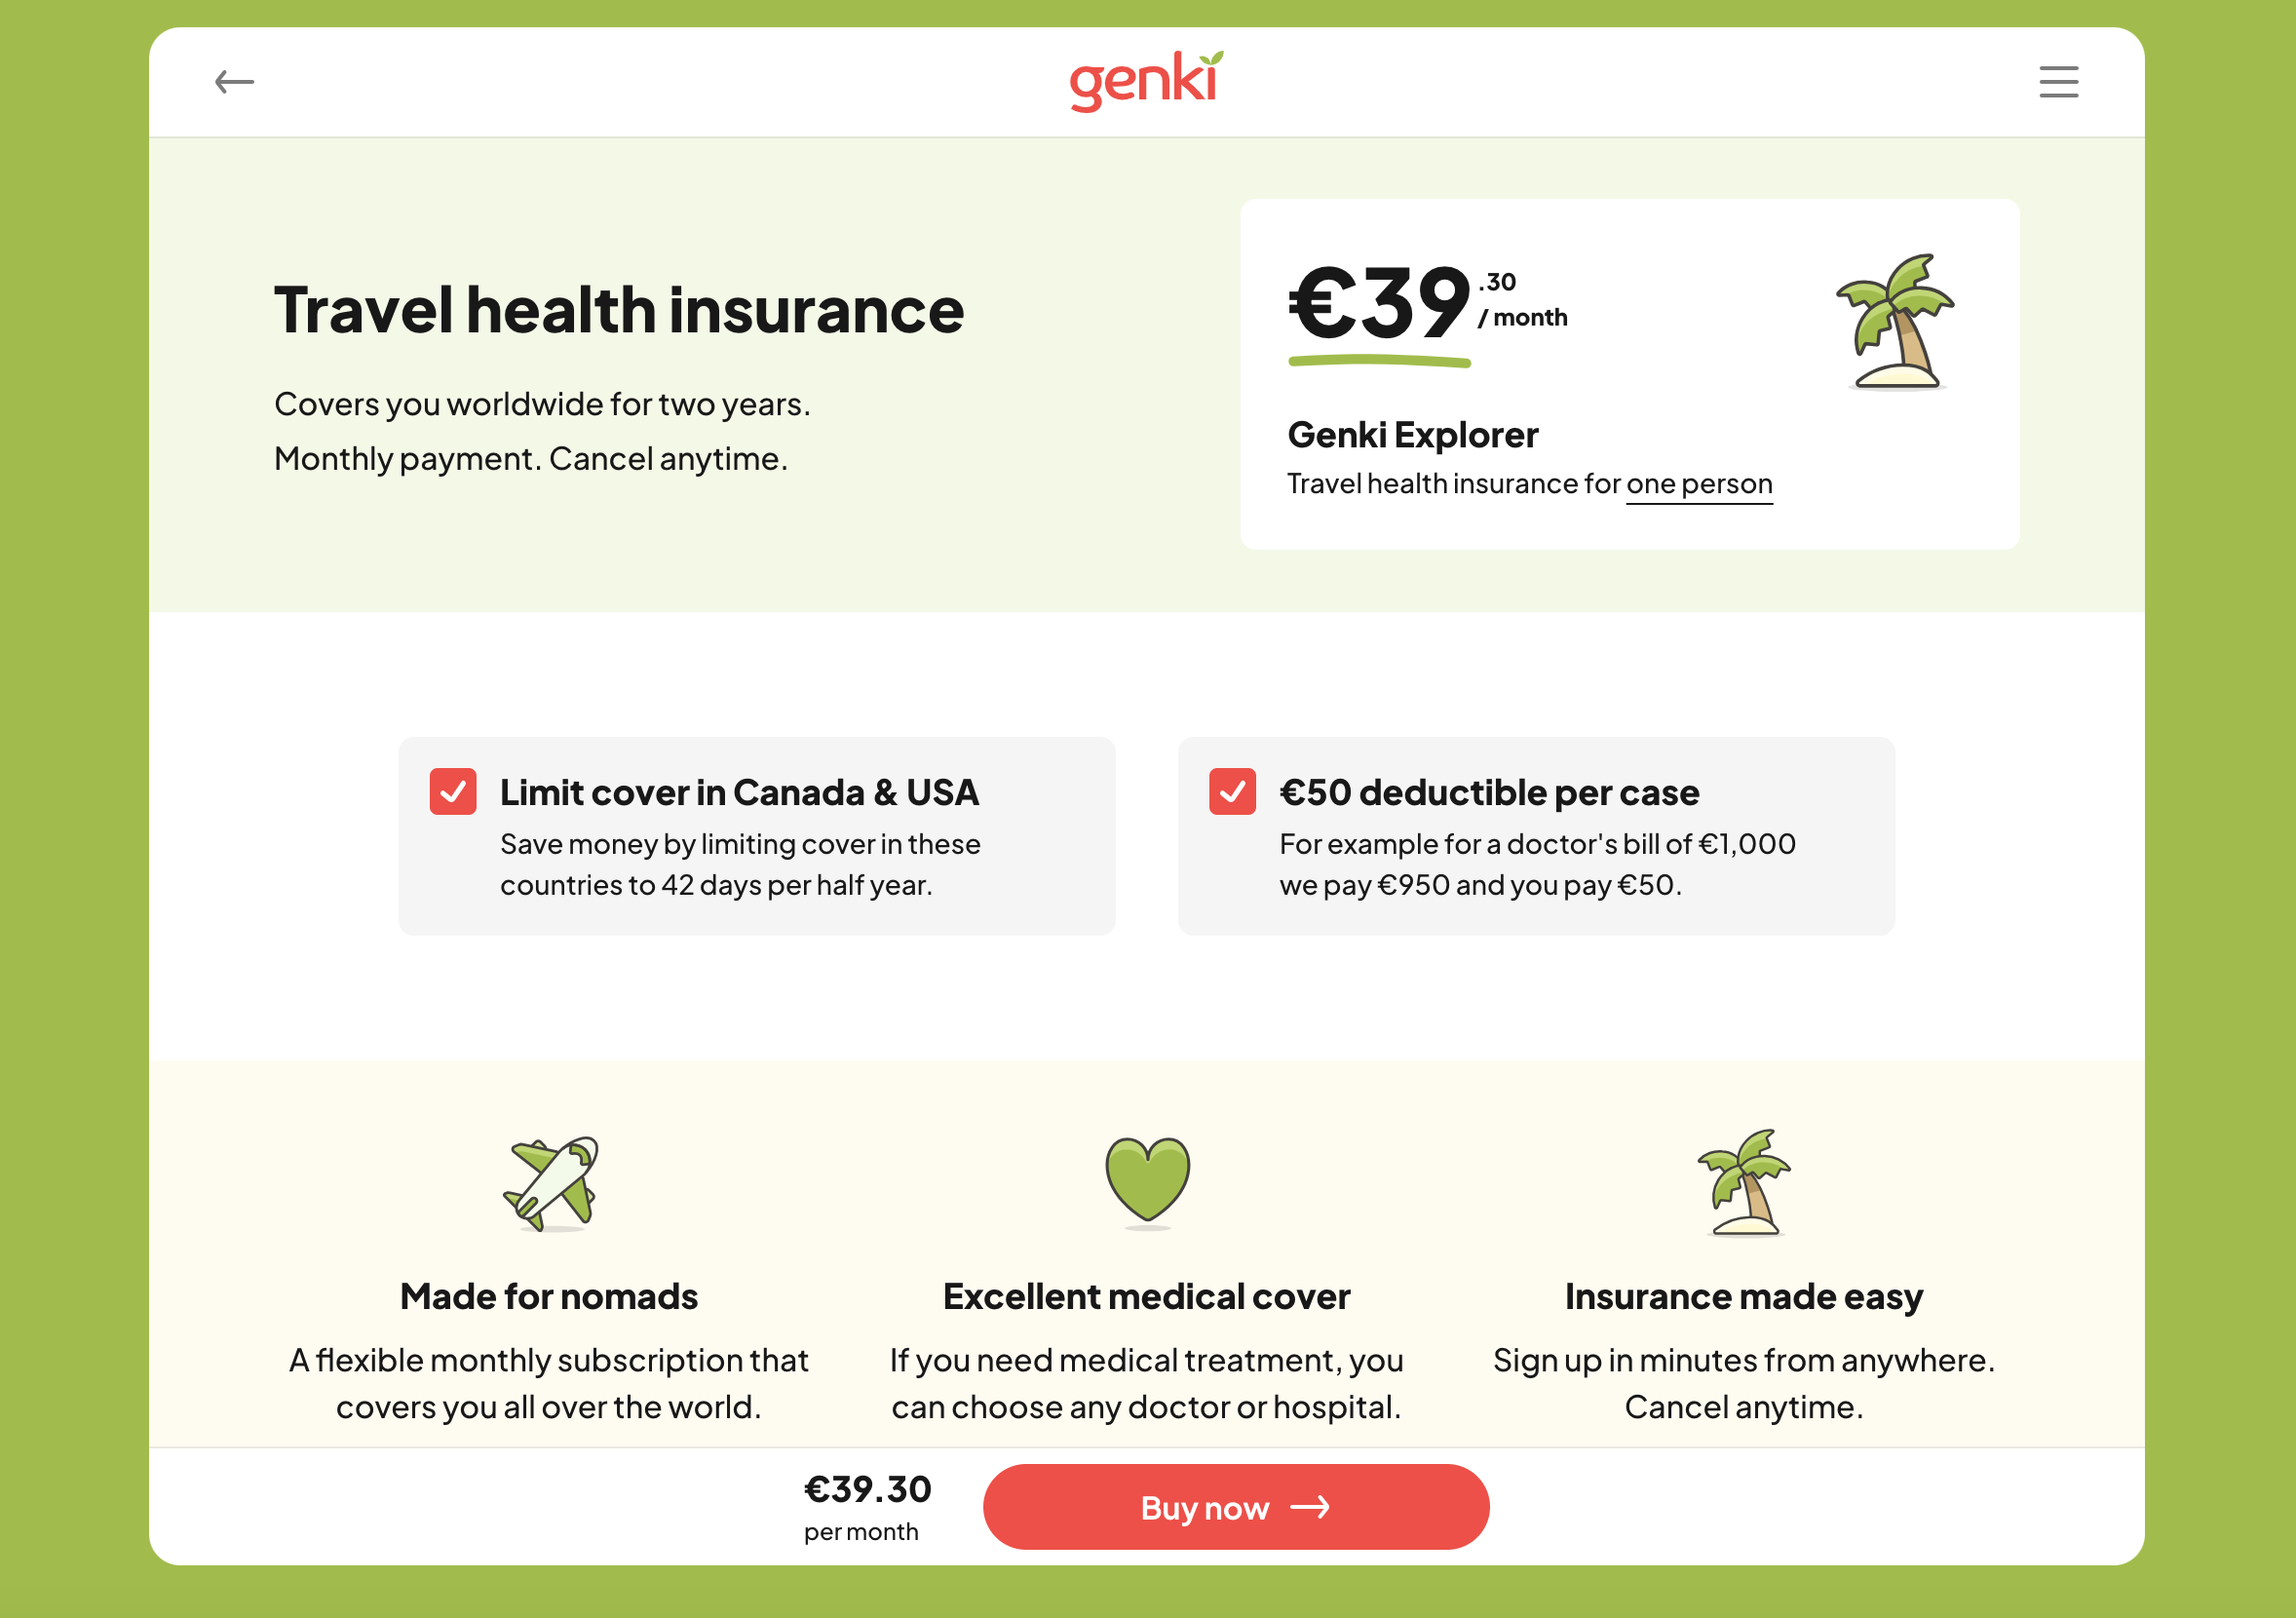 Genki quote step 4: customize your policy with limit cover in Canada and USA and add 50 euros deductible per case